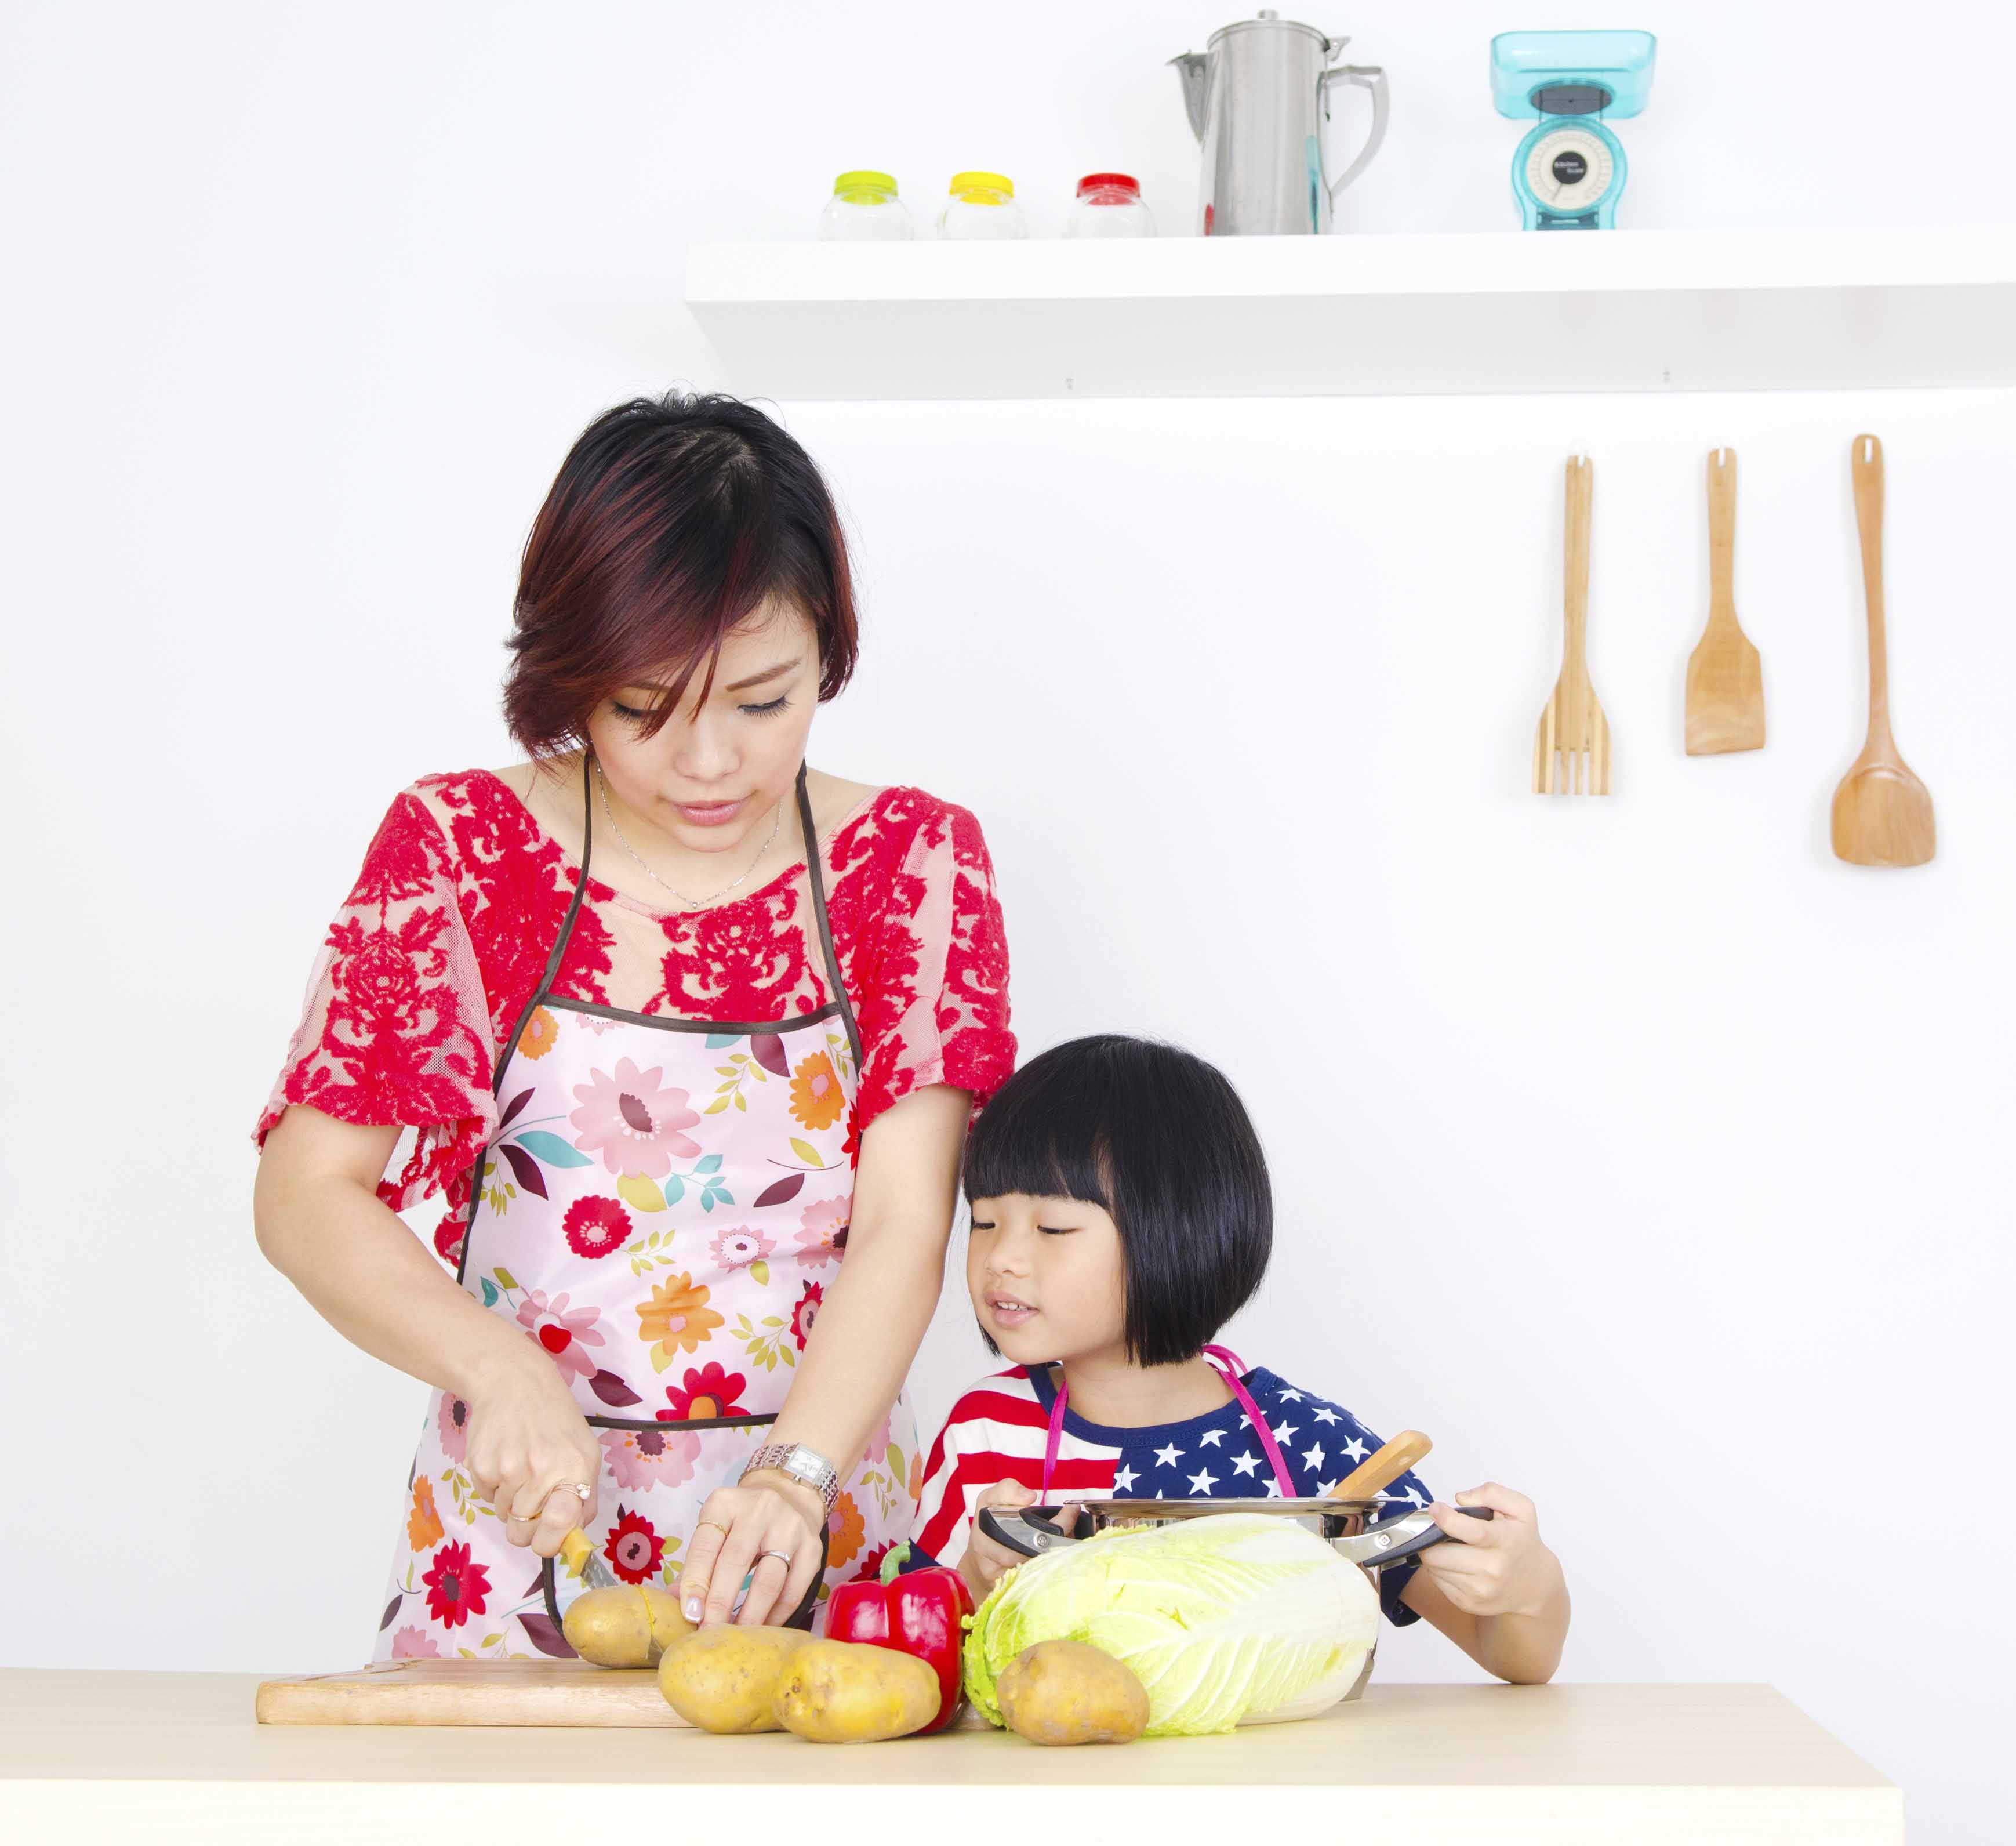 Mother and Daughter cooking together